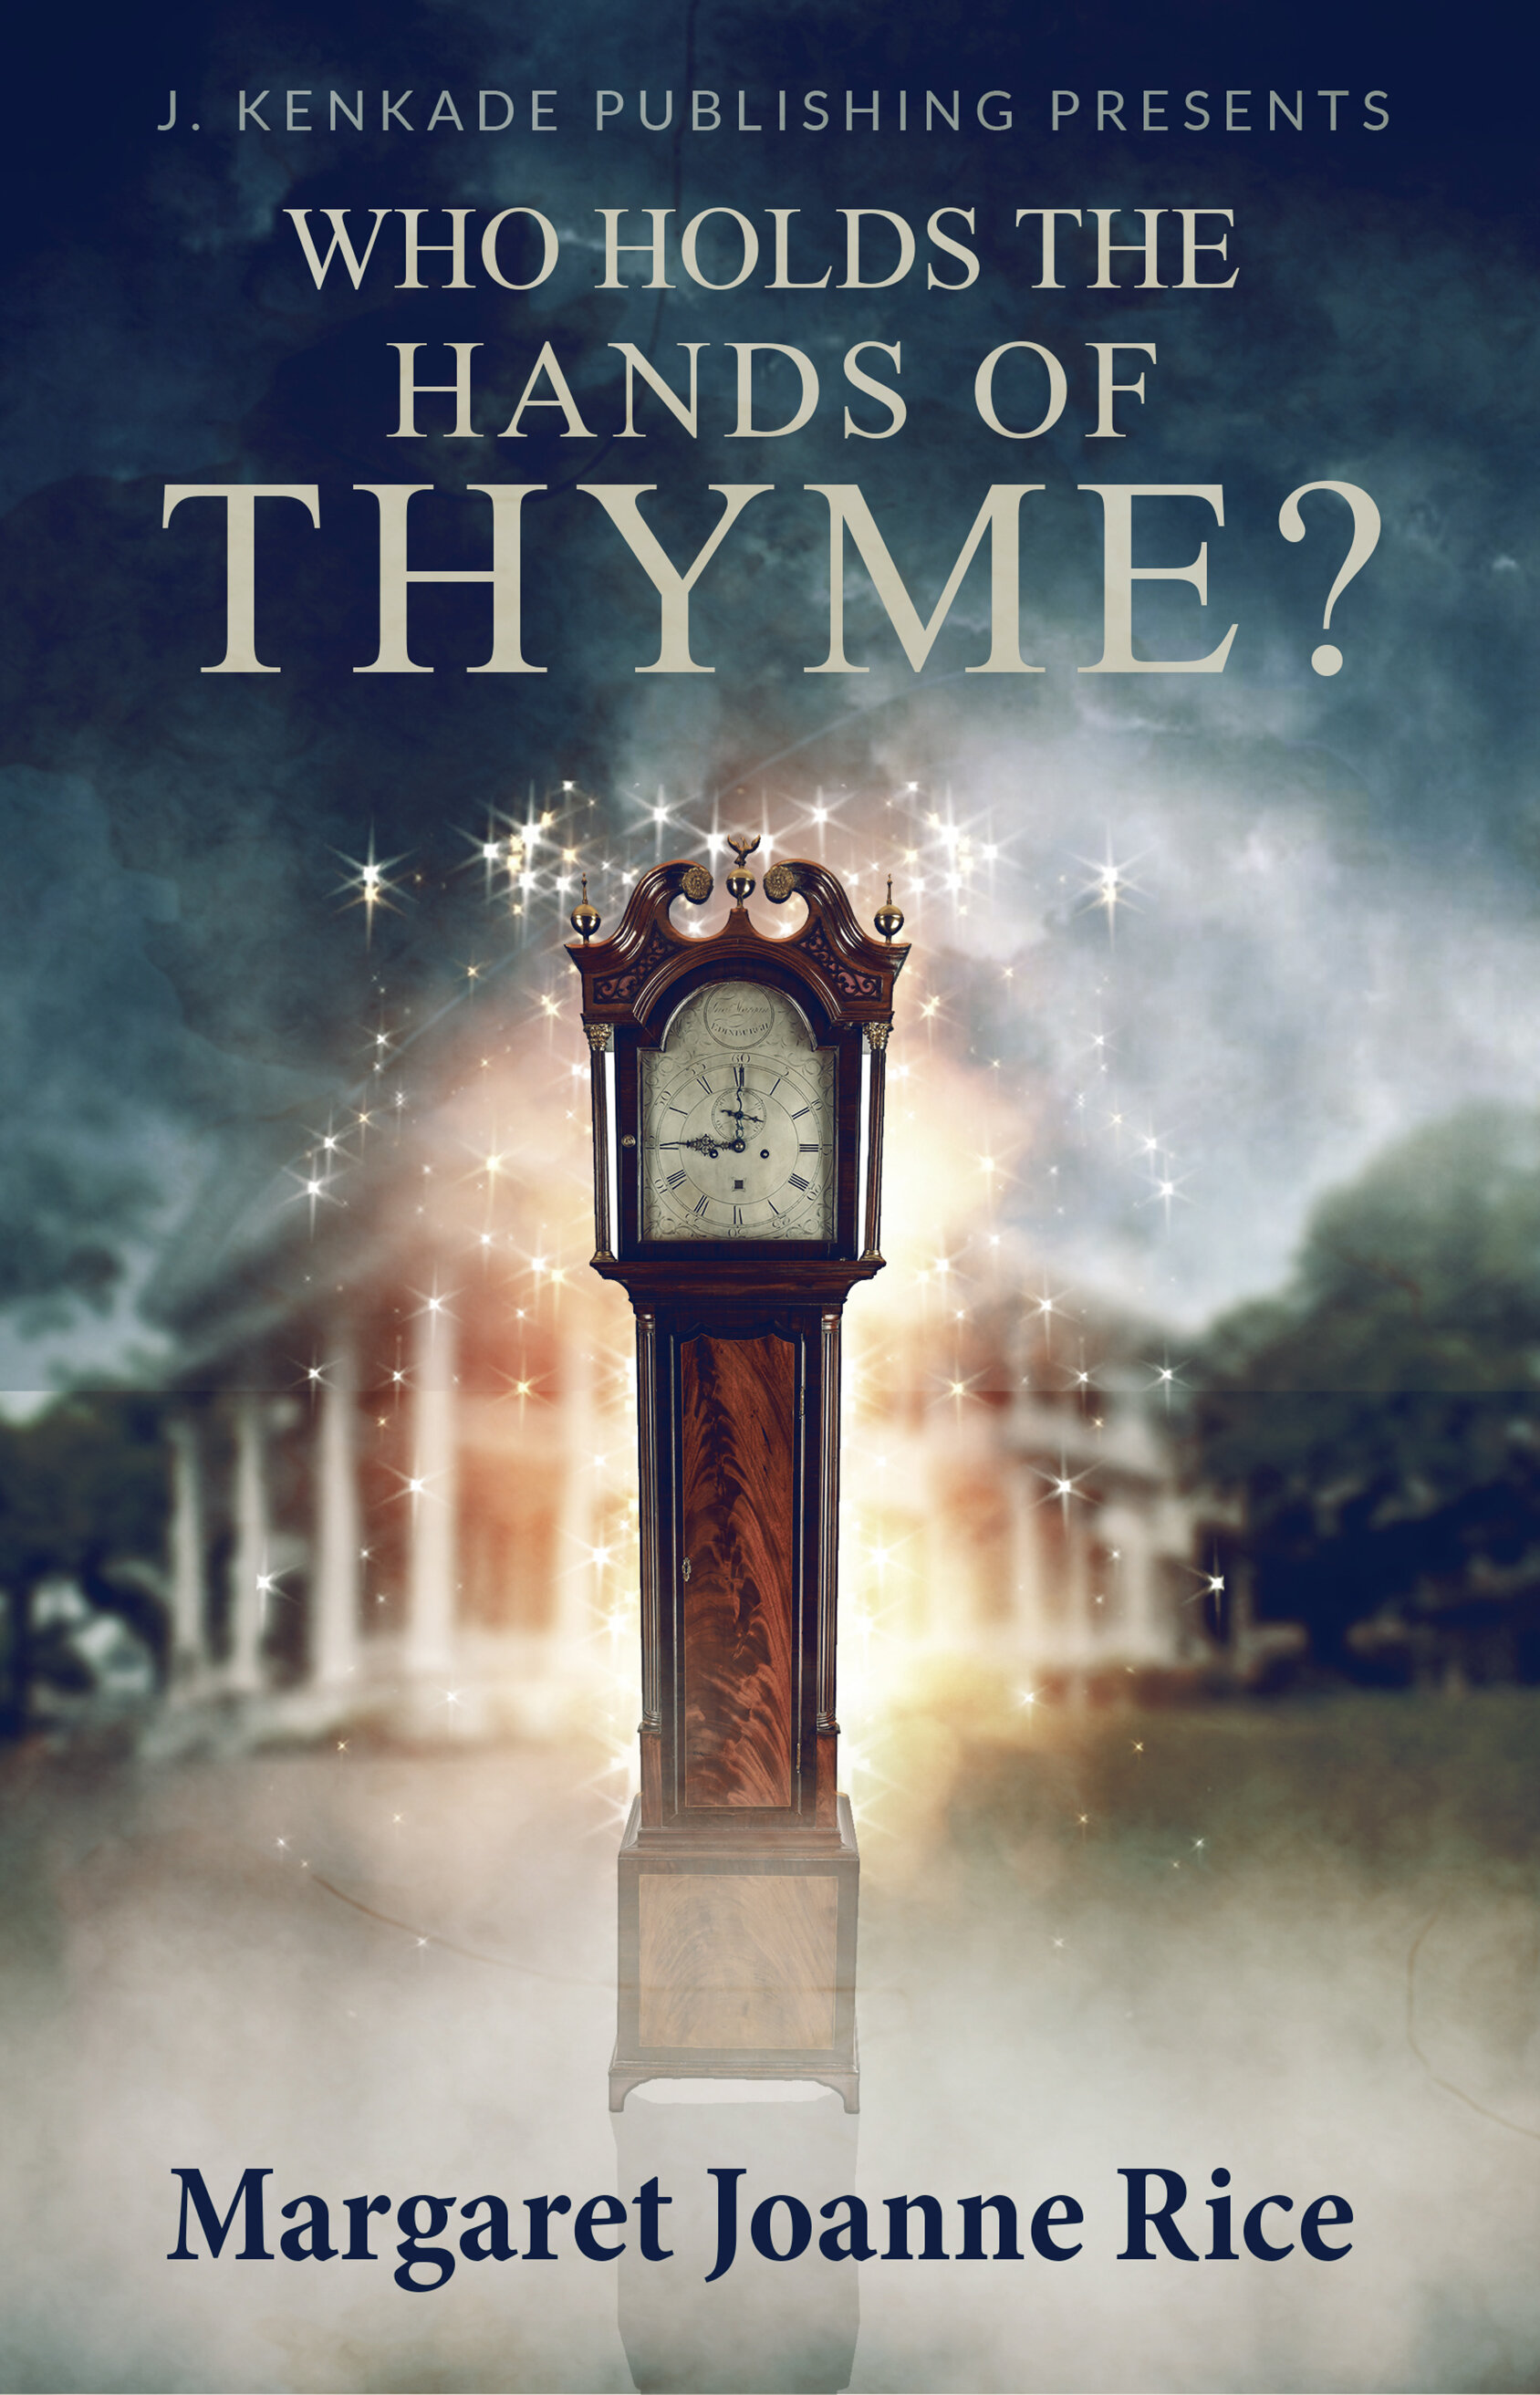 Who Holds the Hands of Thyme?